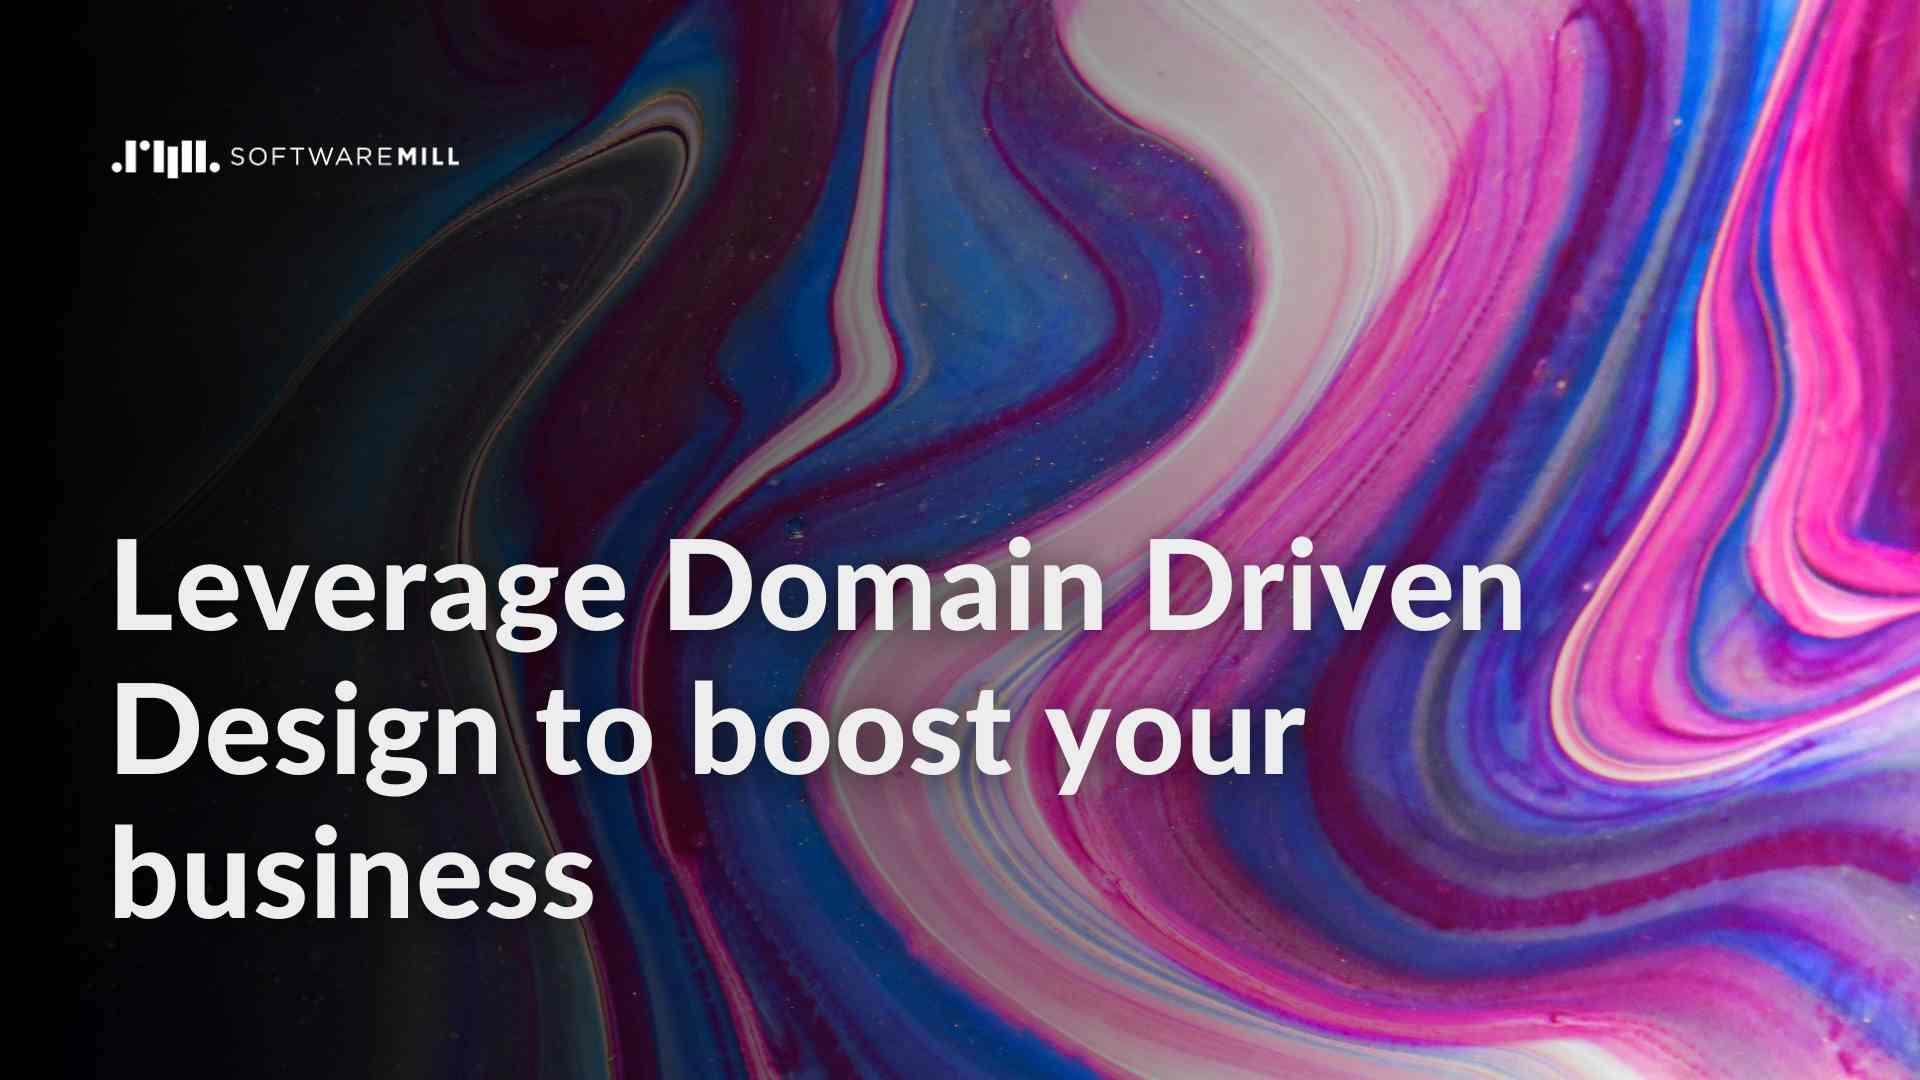 Leverage Domain Driven Design to boost your business webp image